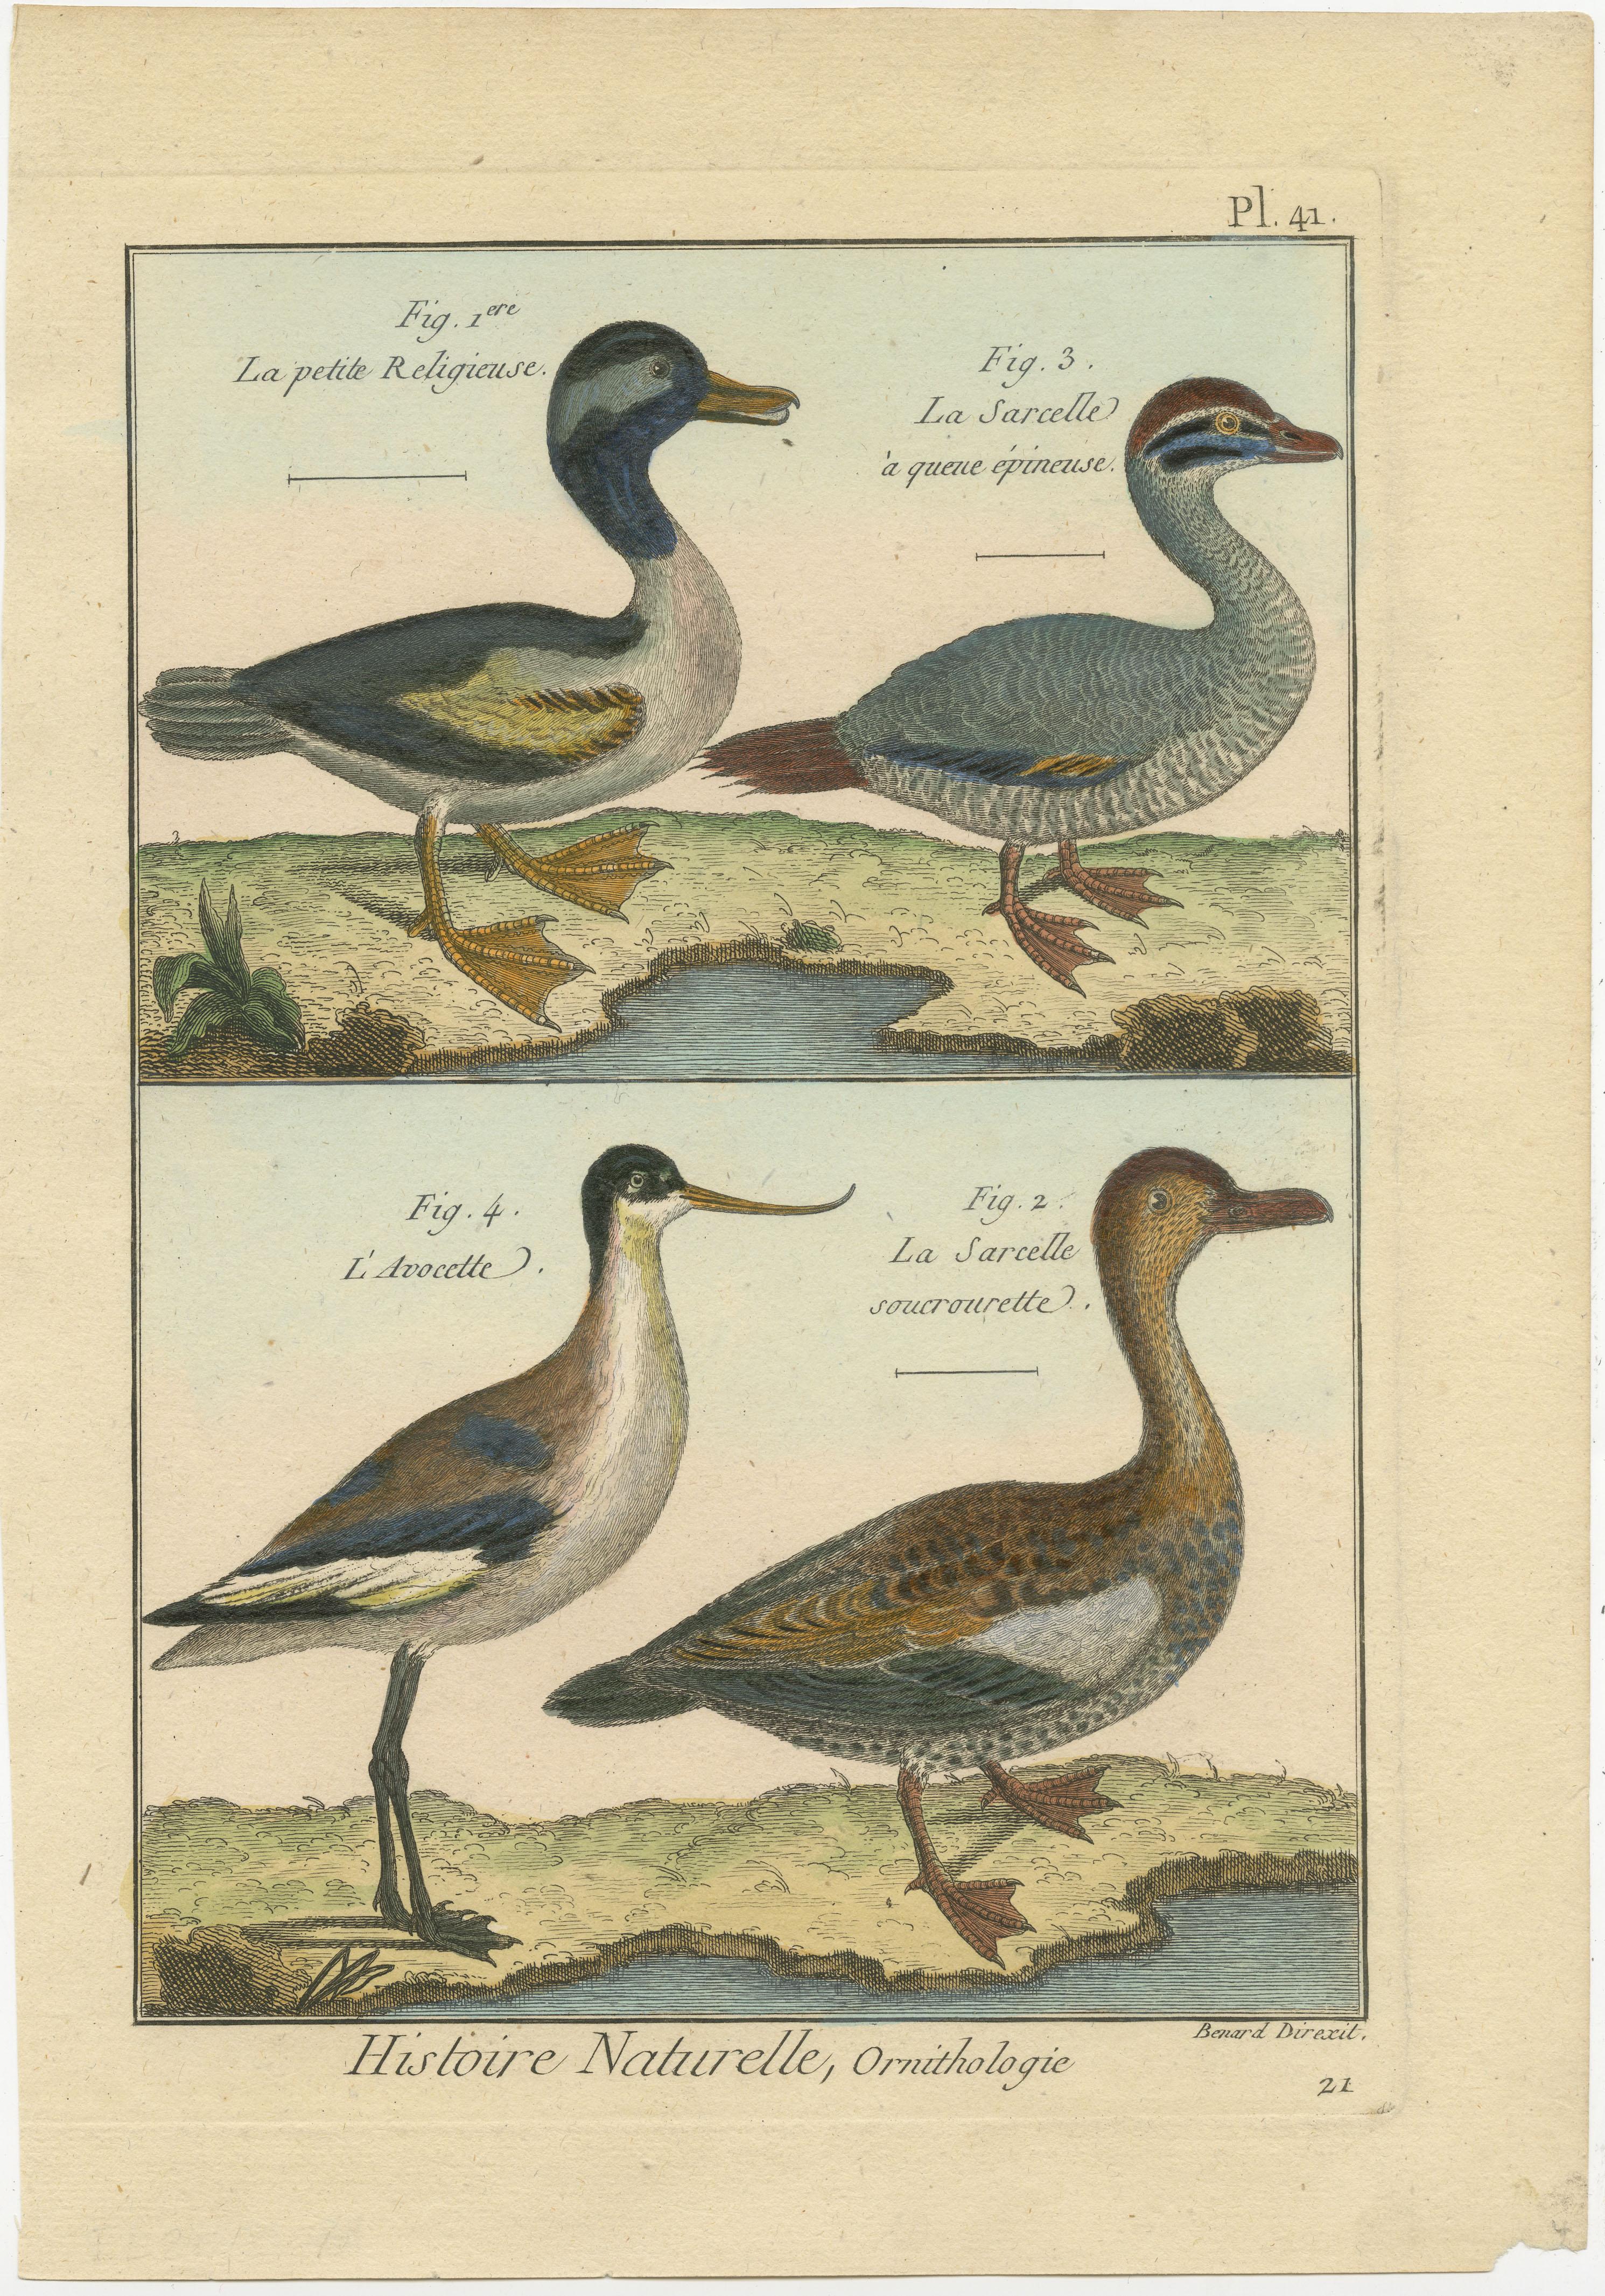 An authentic, perfect and bright, originally hand-colored, illustration of 3 Ducks and an Avocet, on parchment paper (copper engraving). It has a fine shining because of the authenticly applied egg-yolk as varnish. The Artist is Robert Bernard